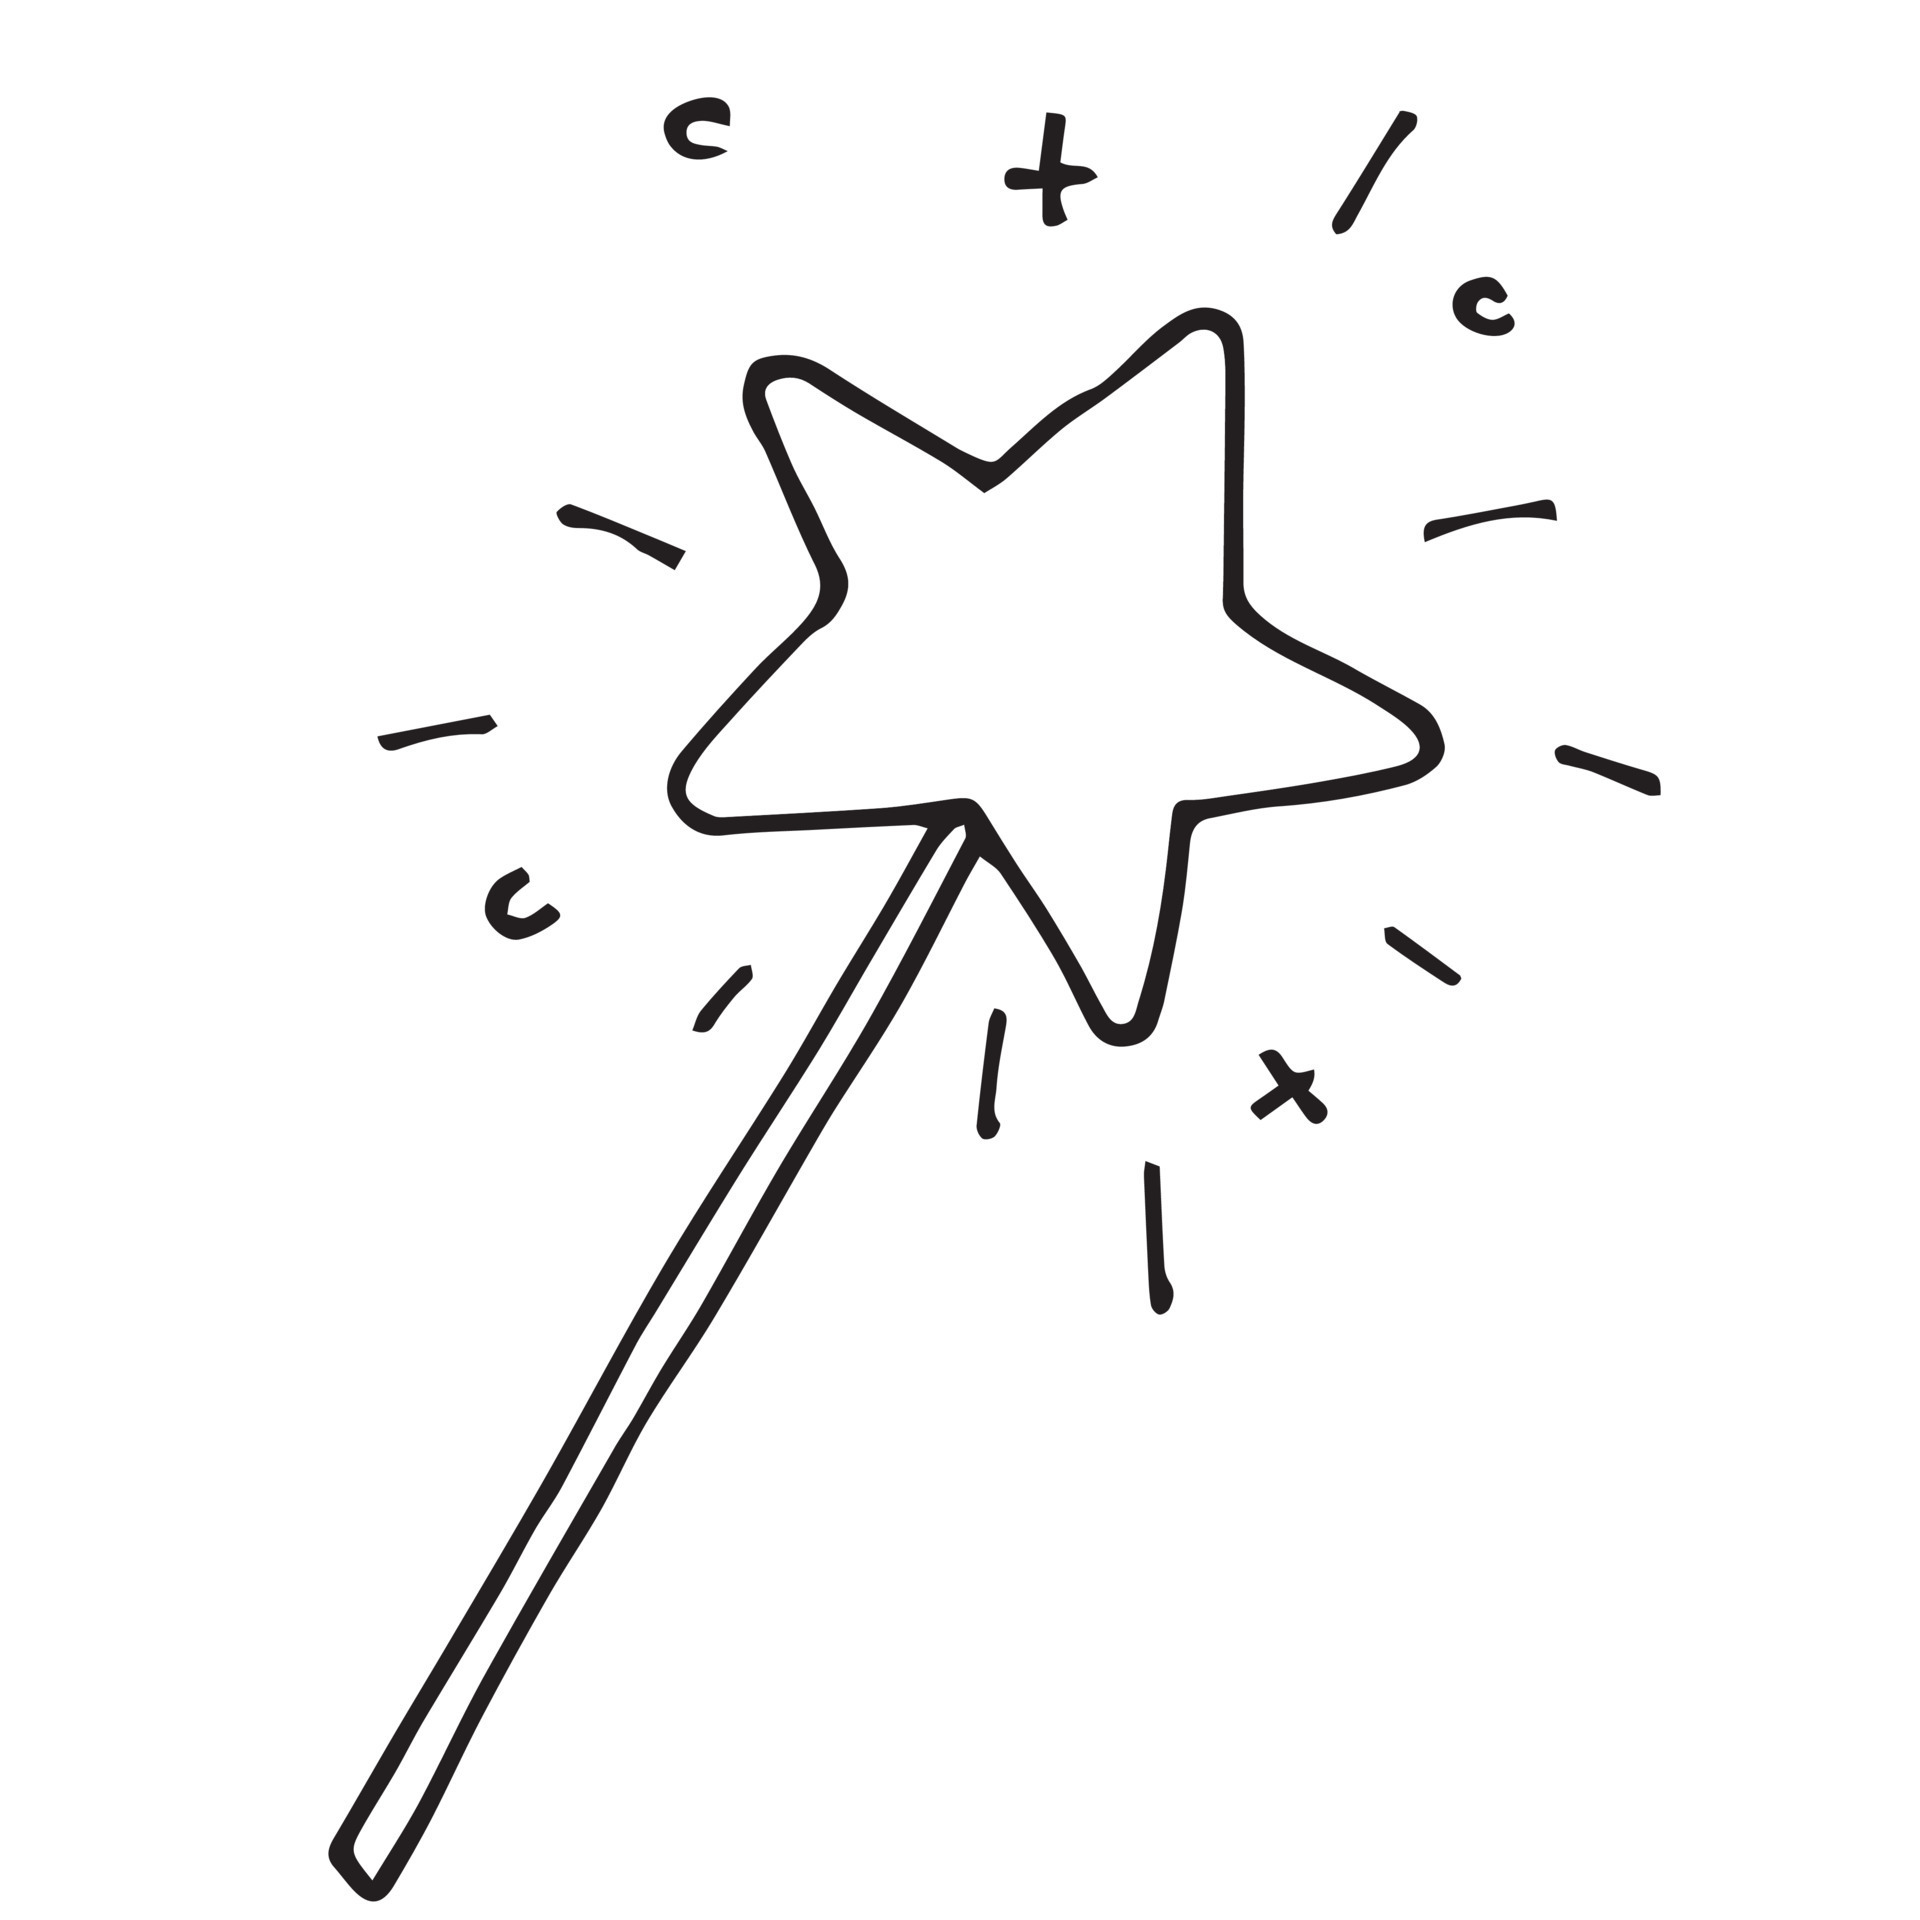 Vector illustration in doodle, flat, cartoon style. Magic wand. A simple  cute drawing for children, a magic wand with a star on the end for little  princesses. isolated on a white background.